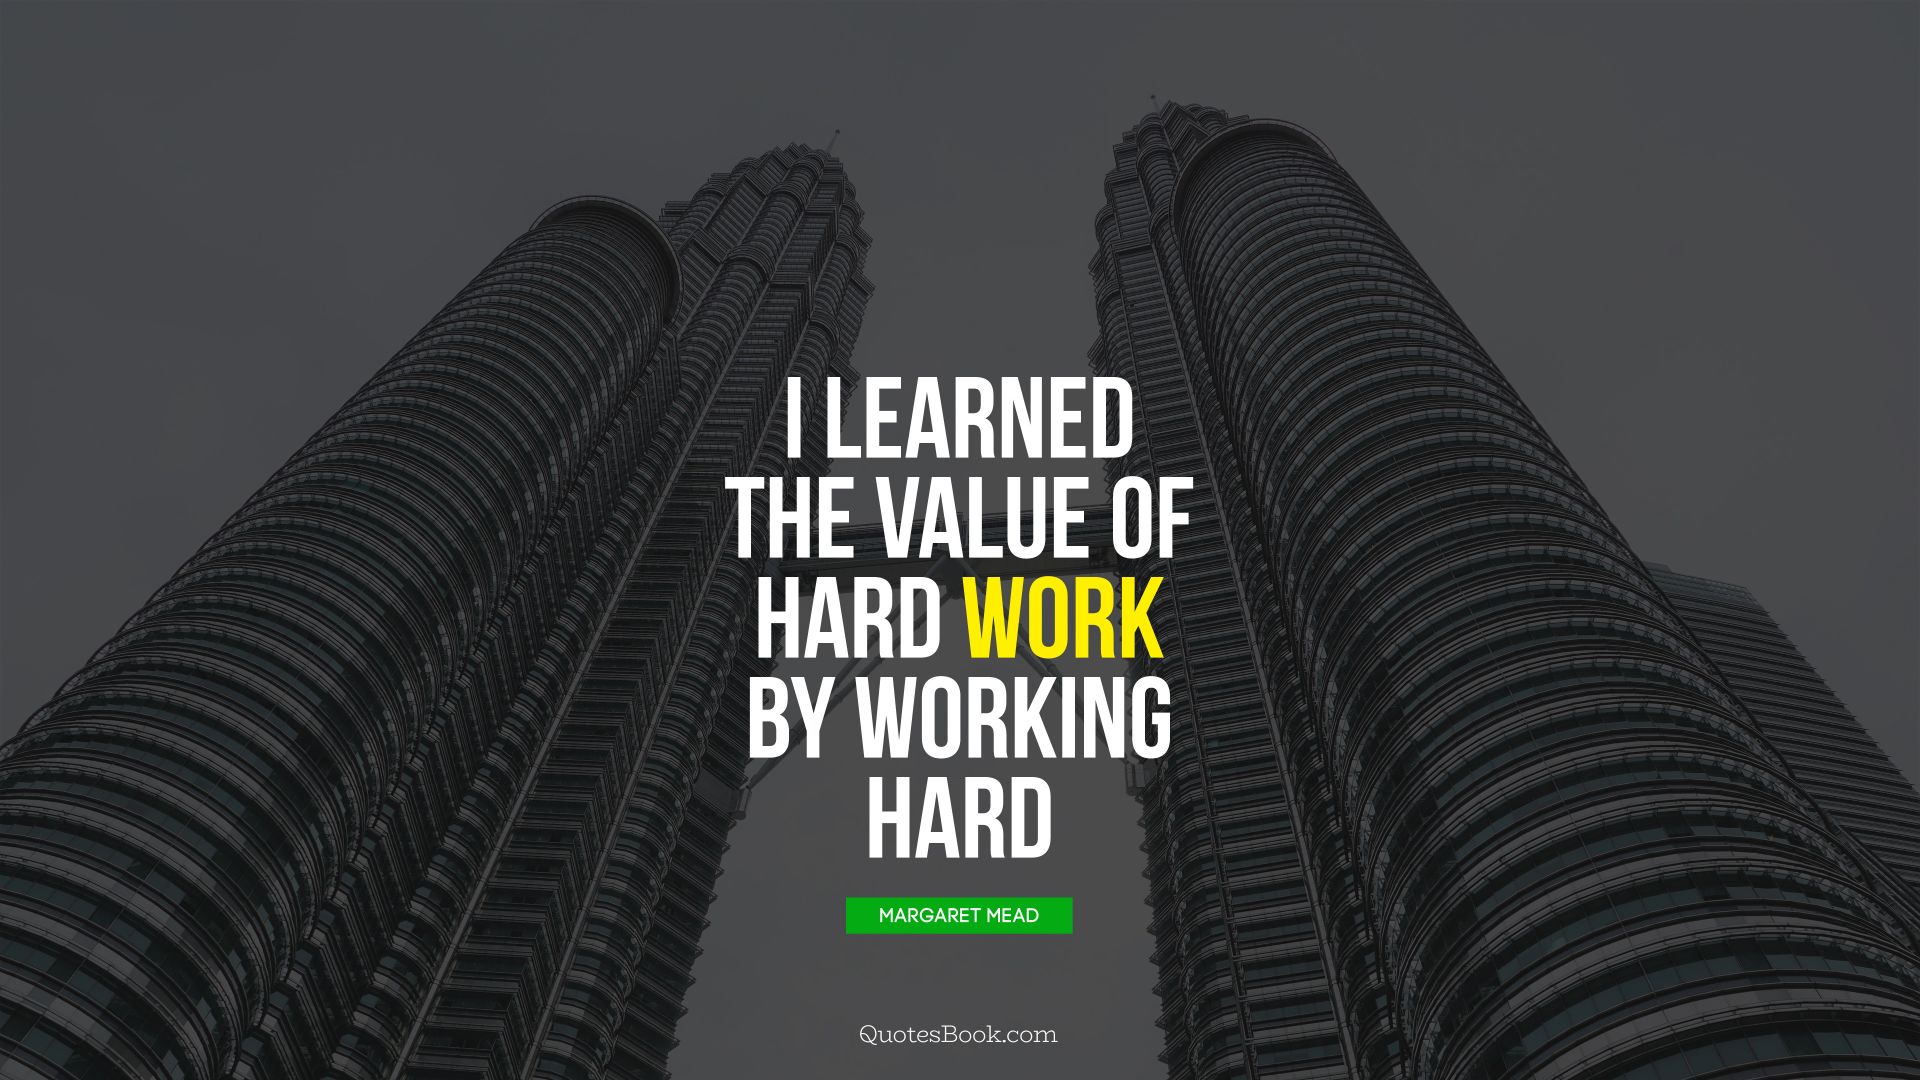 I learned the value of hard work by working hard. - Quote by Margaret Mead